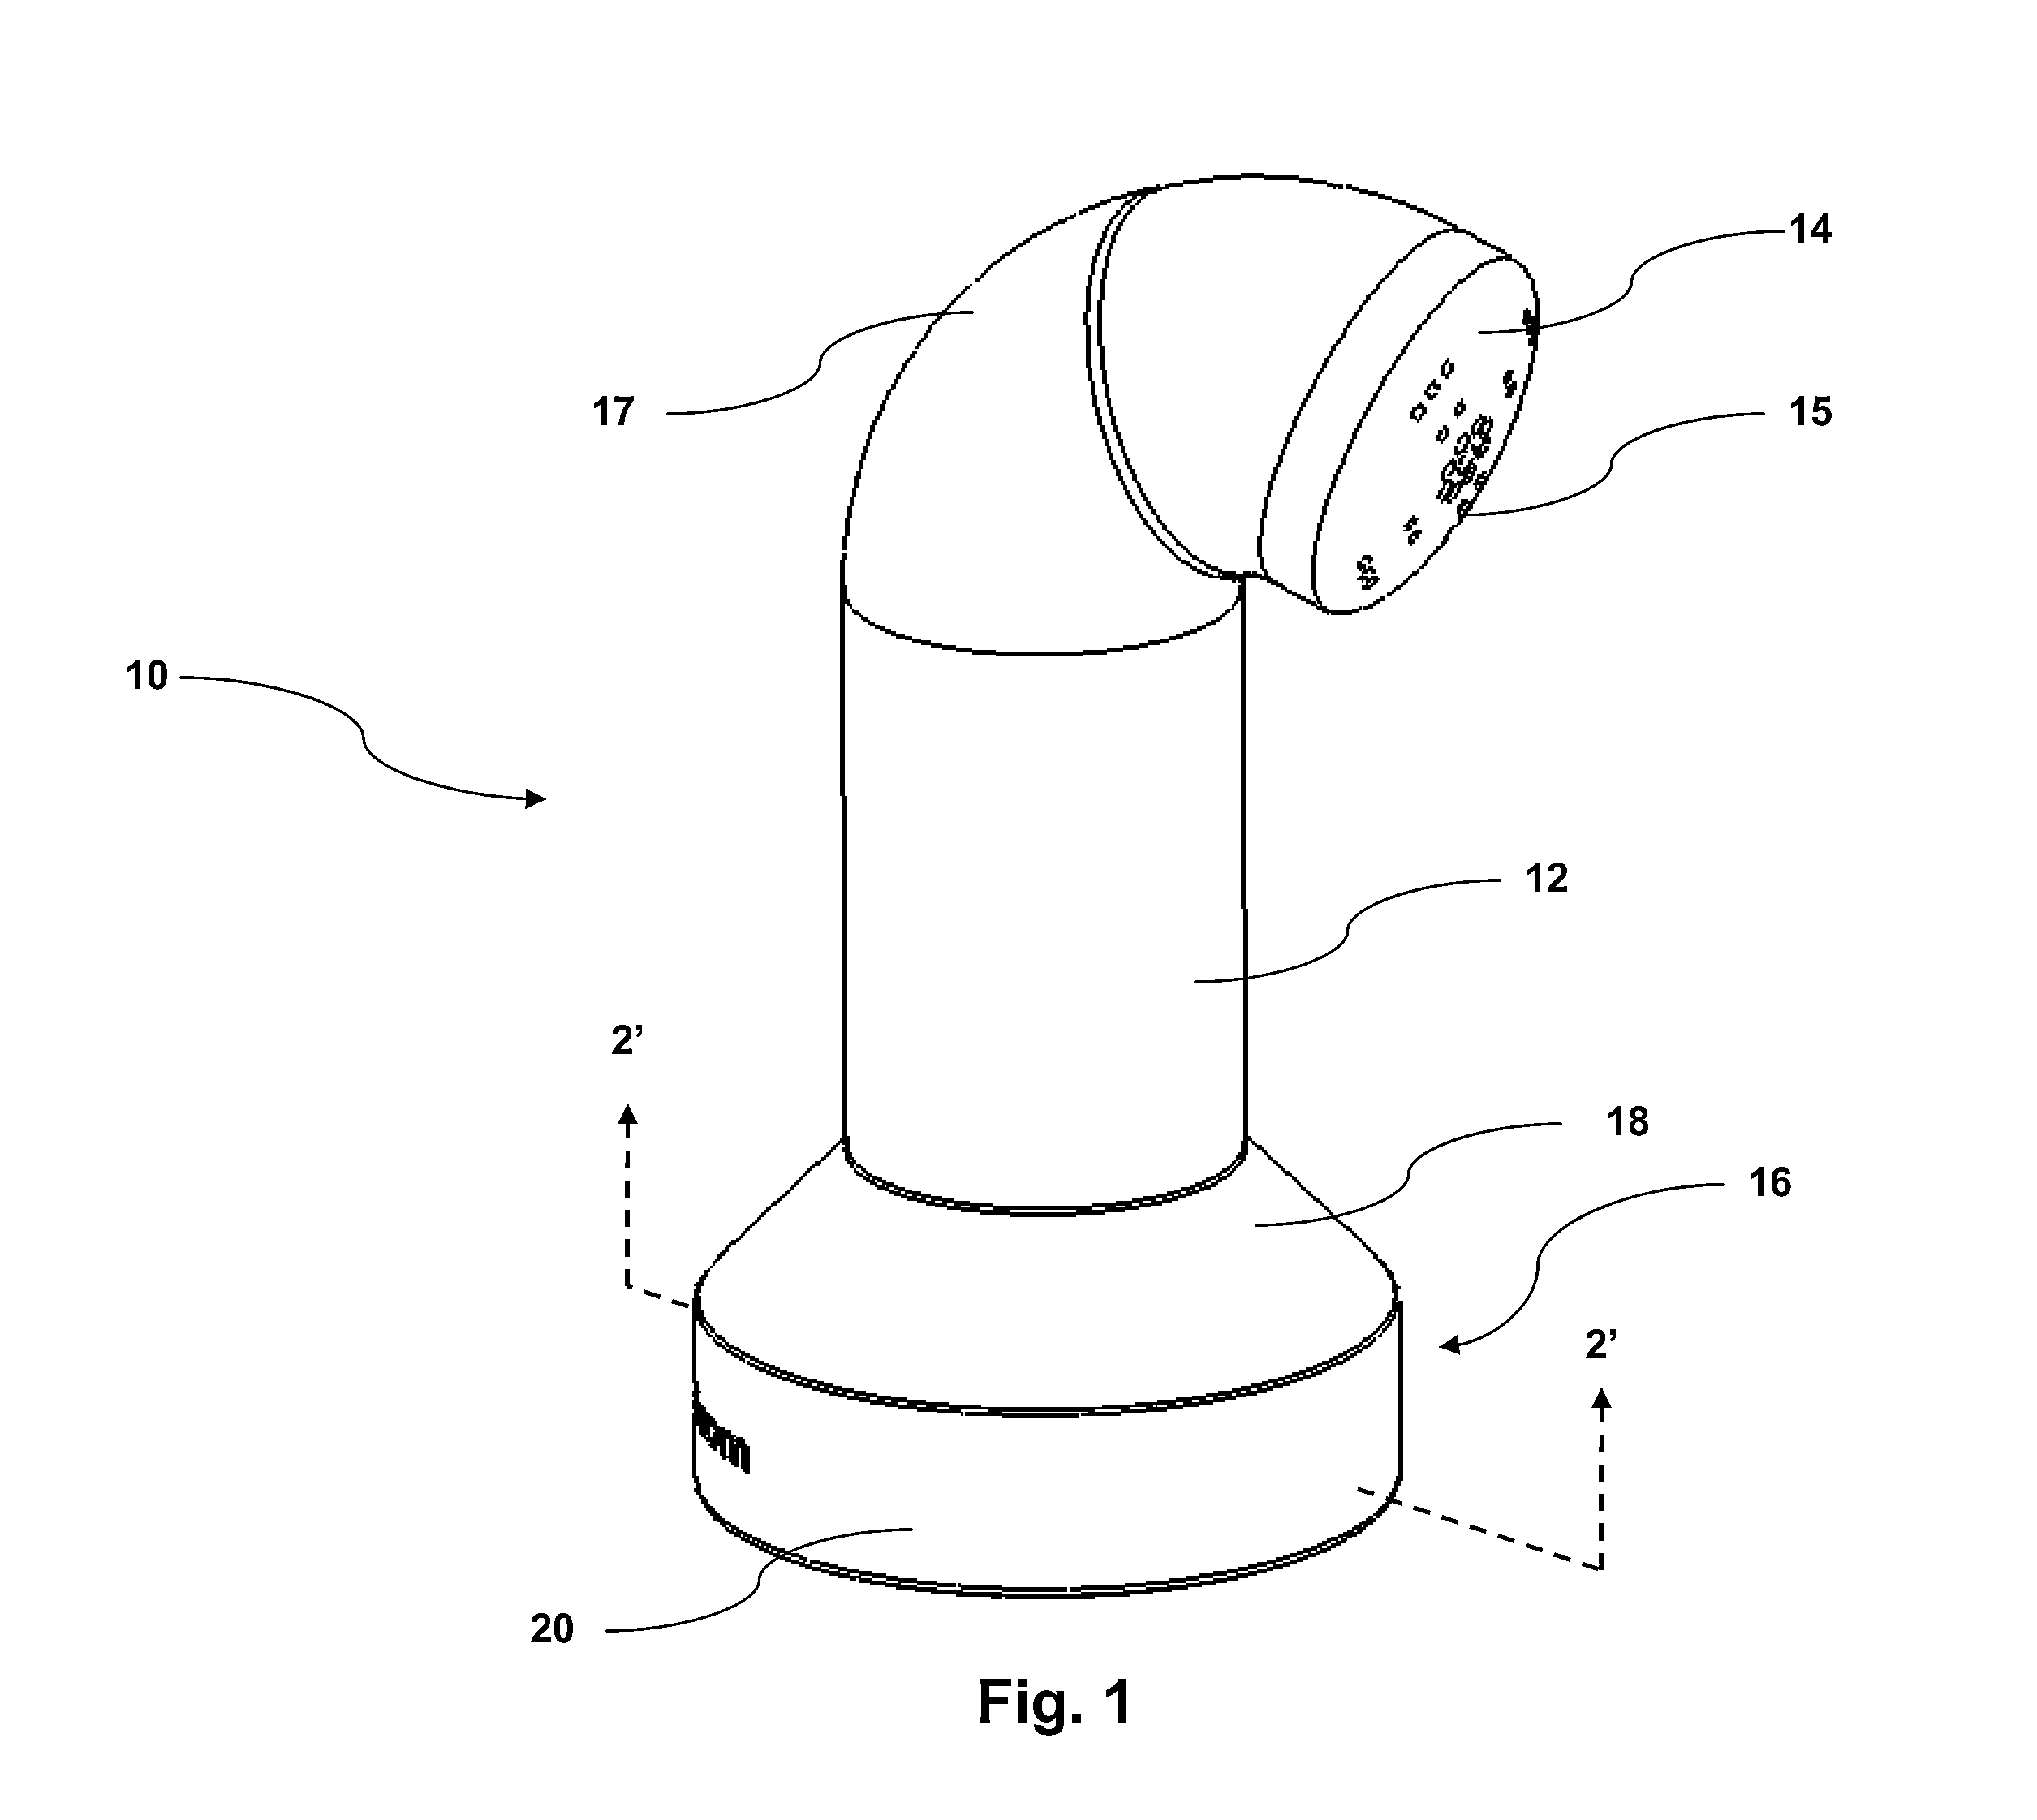 Systems and Methods for Producing Streams of Fluid